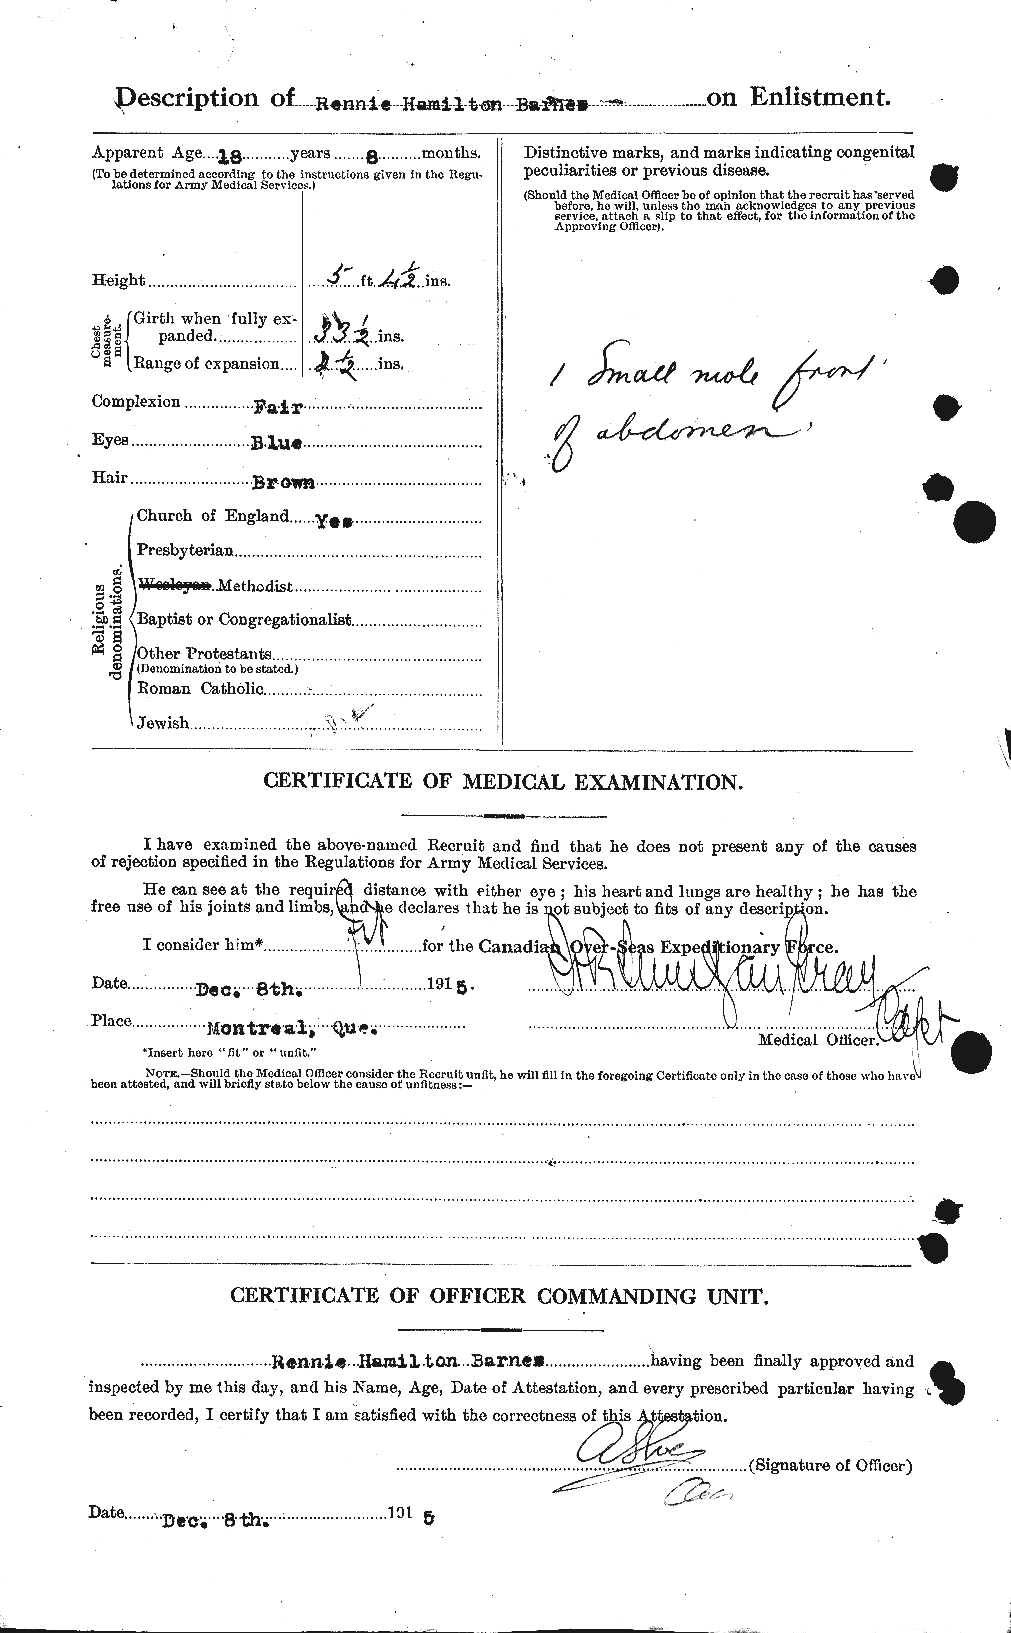 Personnel Records of the First World War - CEF 227384b